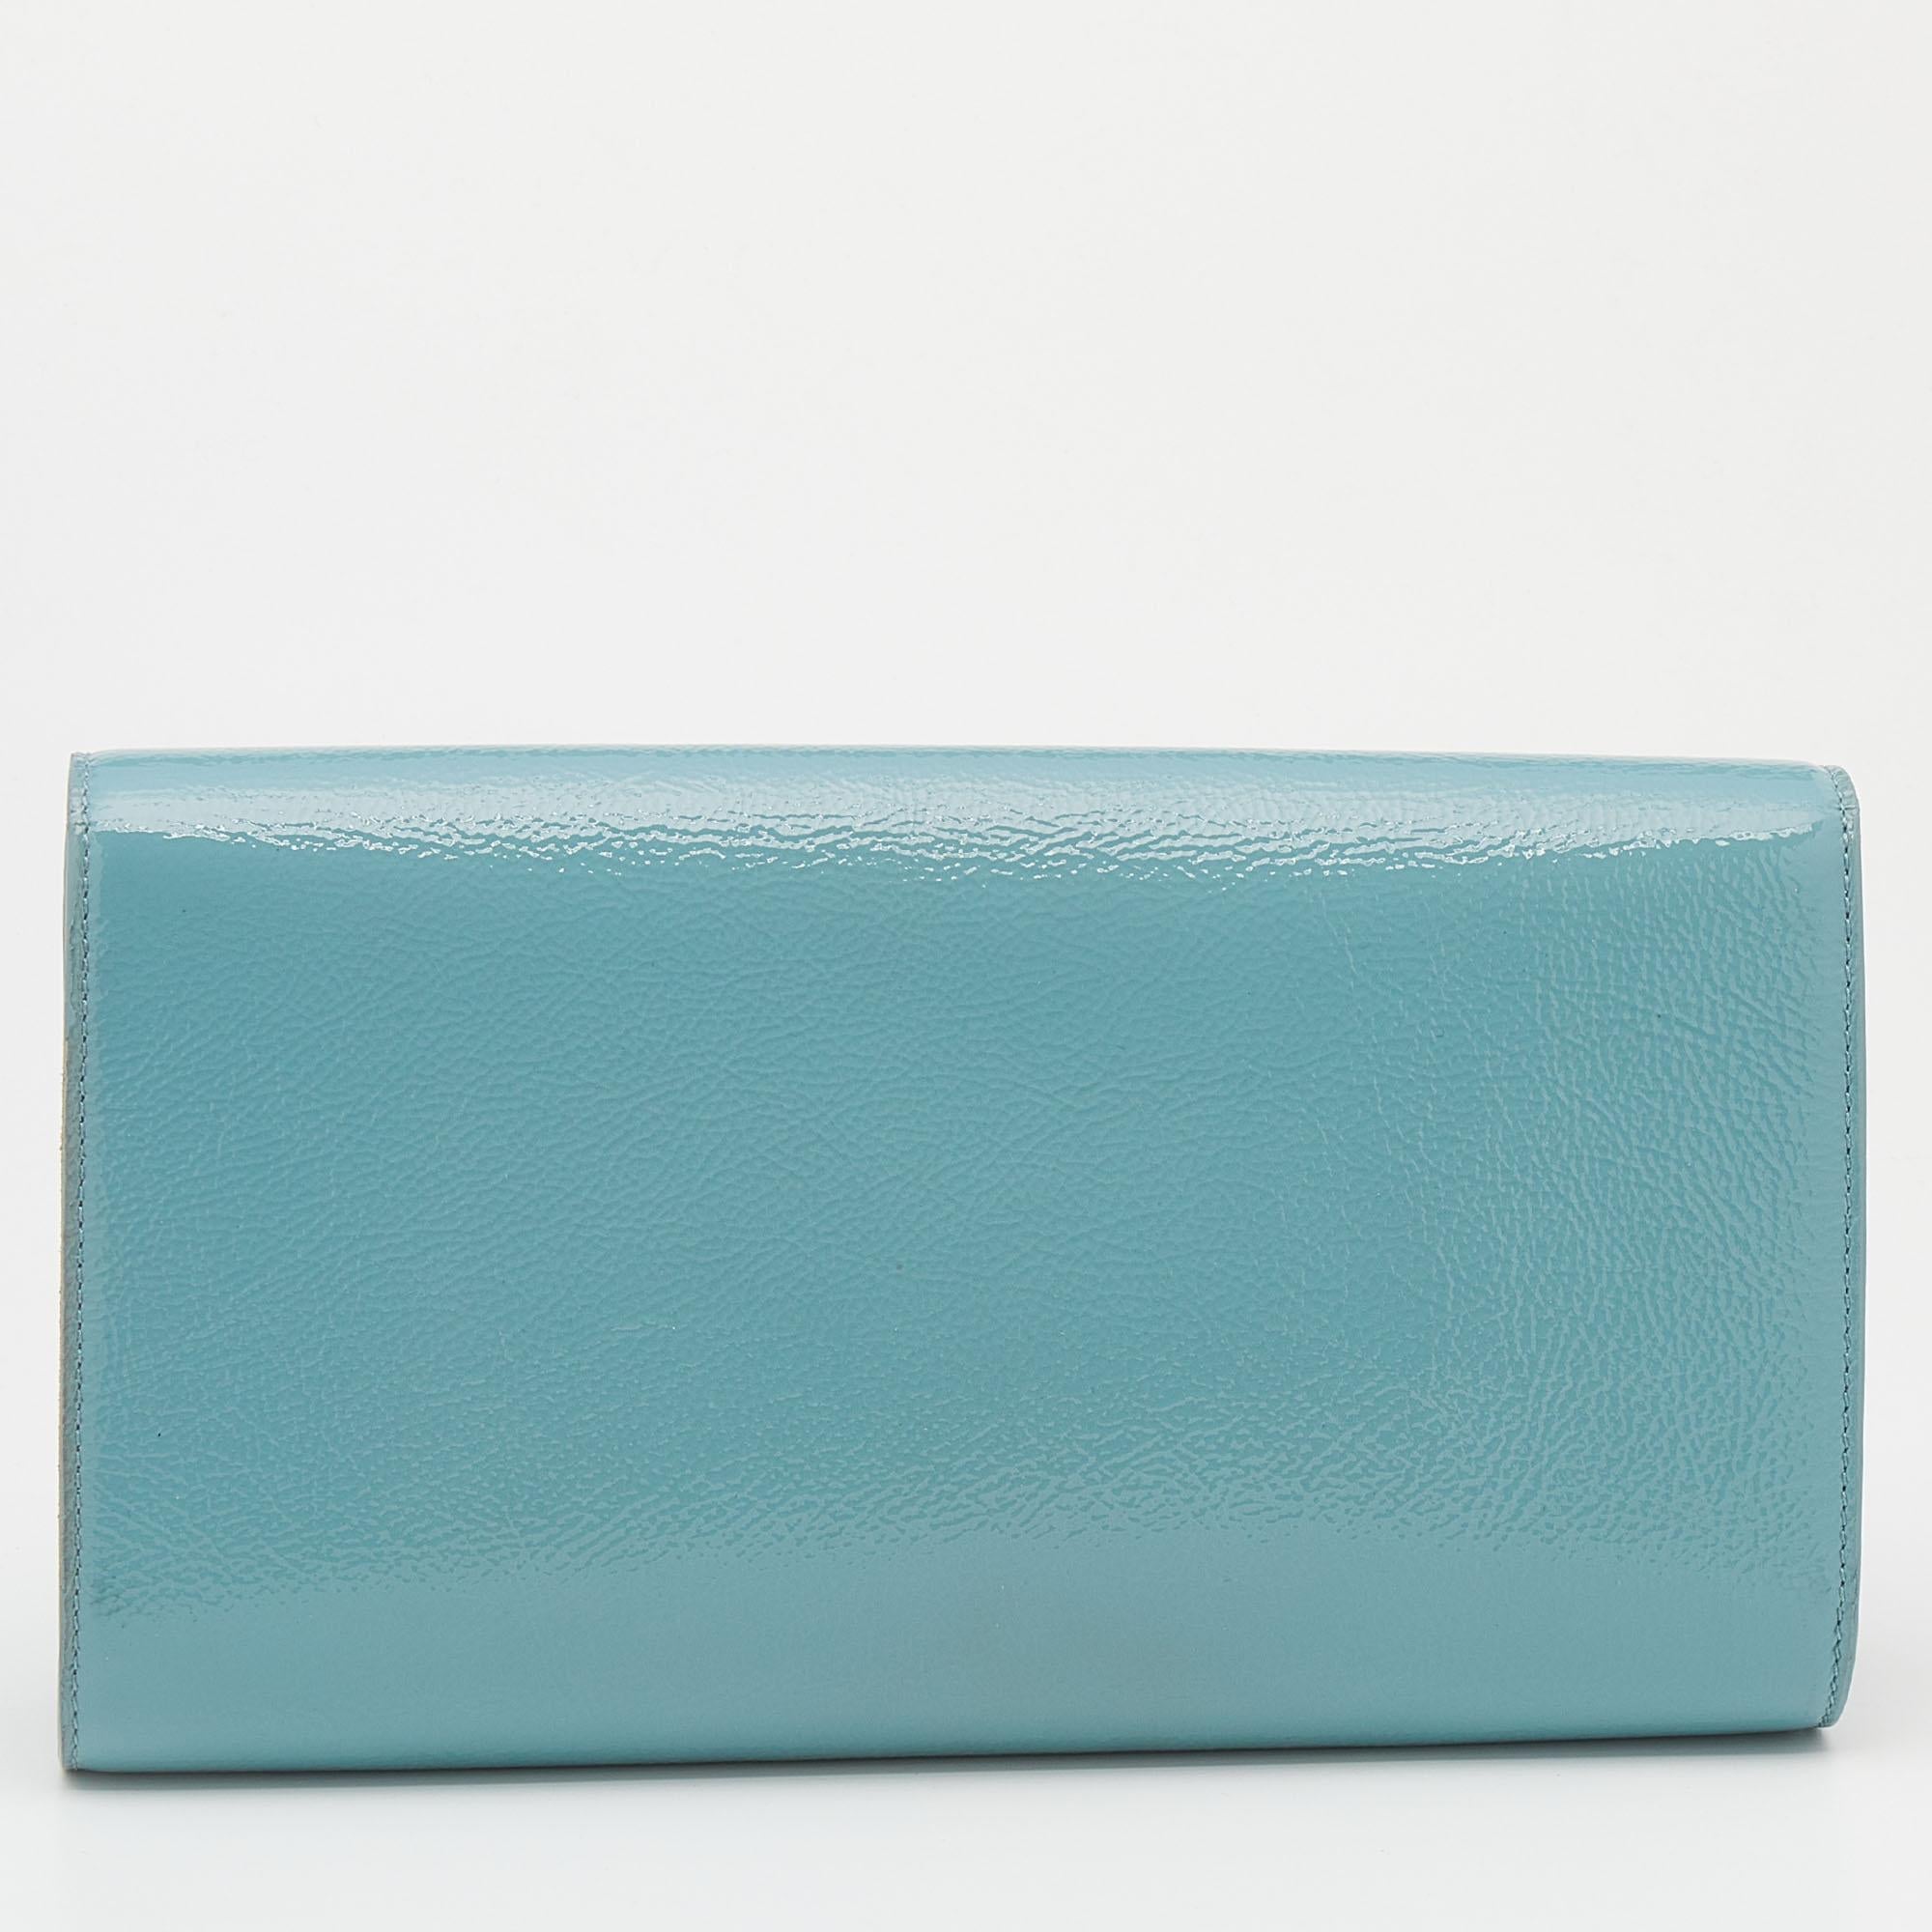 The Belle De Jour clutch from Yves Saint Laurent is a creation that is not only stylish but also exceptionally well-made. It is a design that is simple and embodies class in a modern way. Meticulously crafted from turquoise patent leather, this